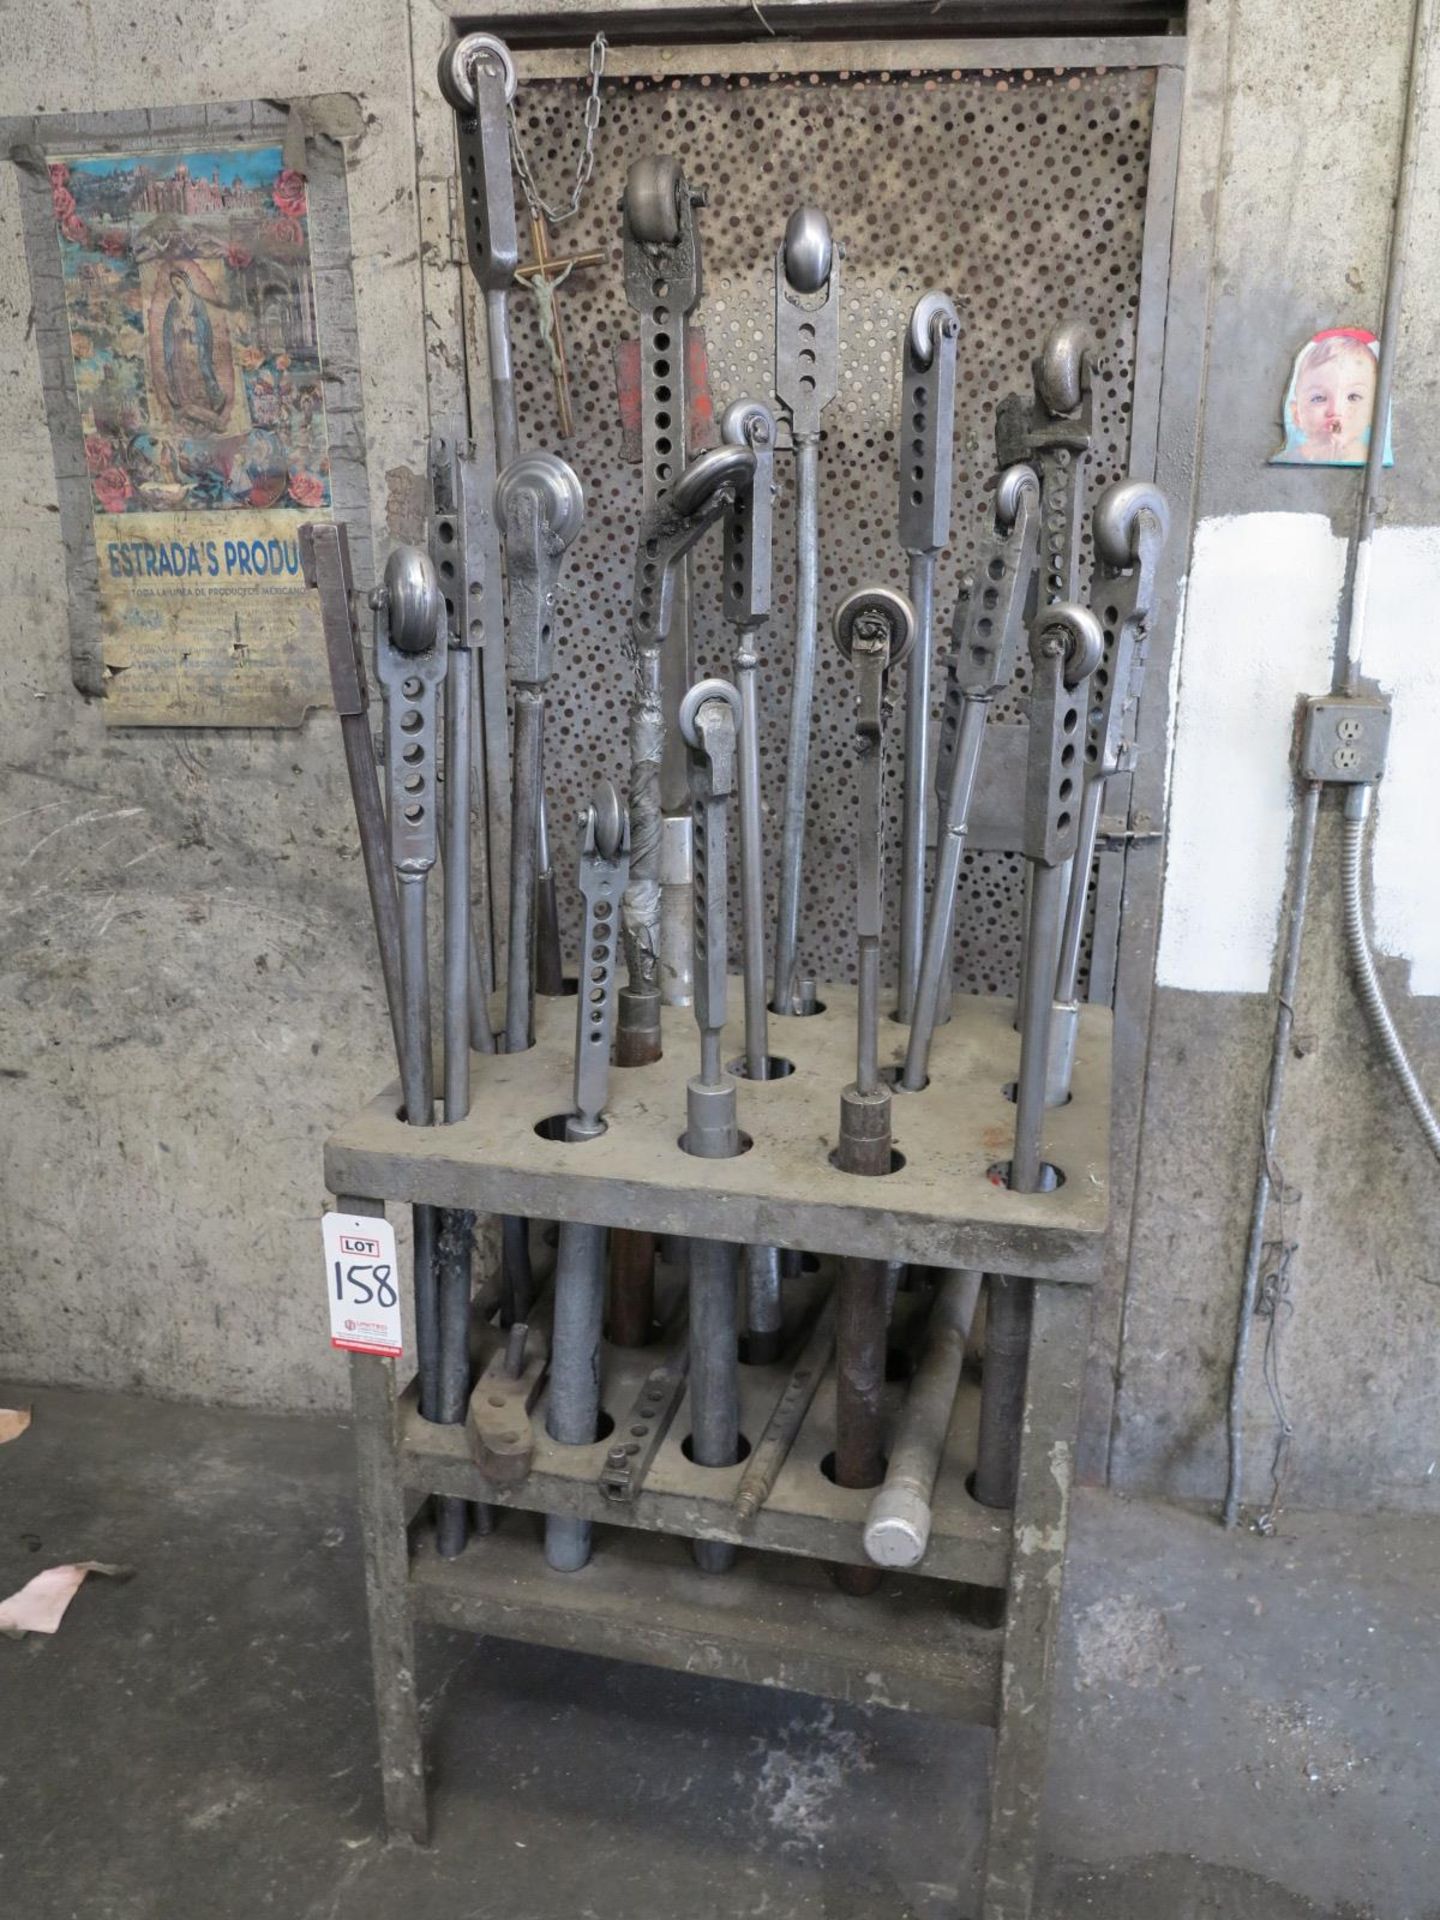 LOT - RACK, W/ CONTENTS OF FORMING IMPLEMENTS